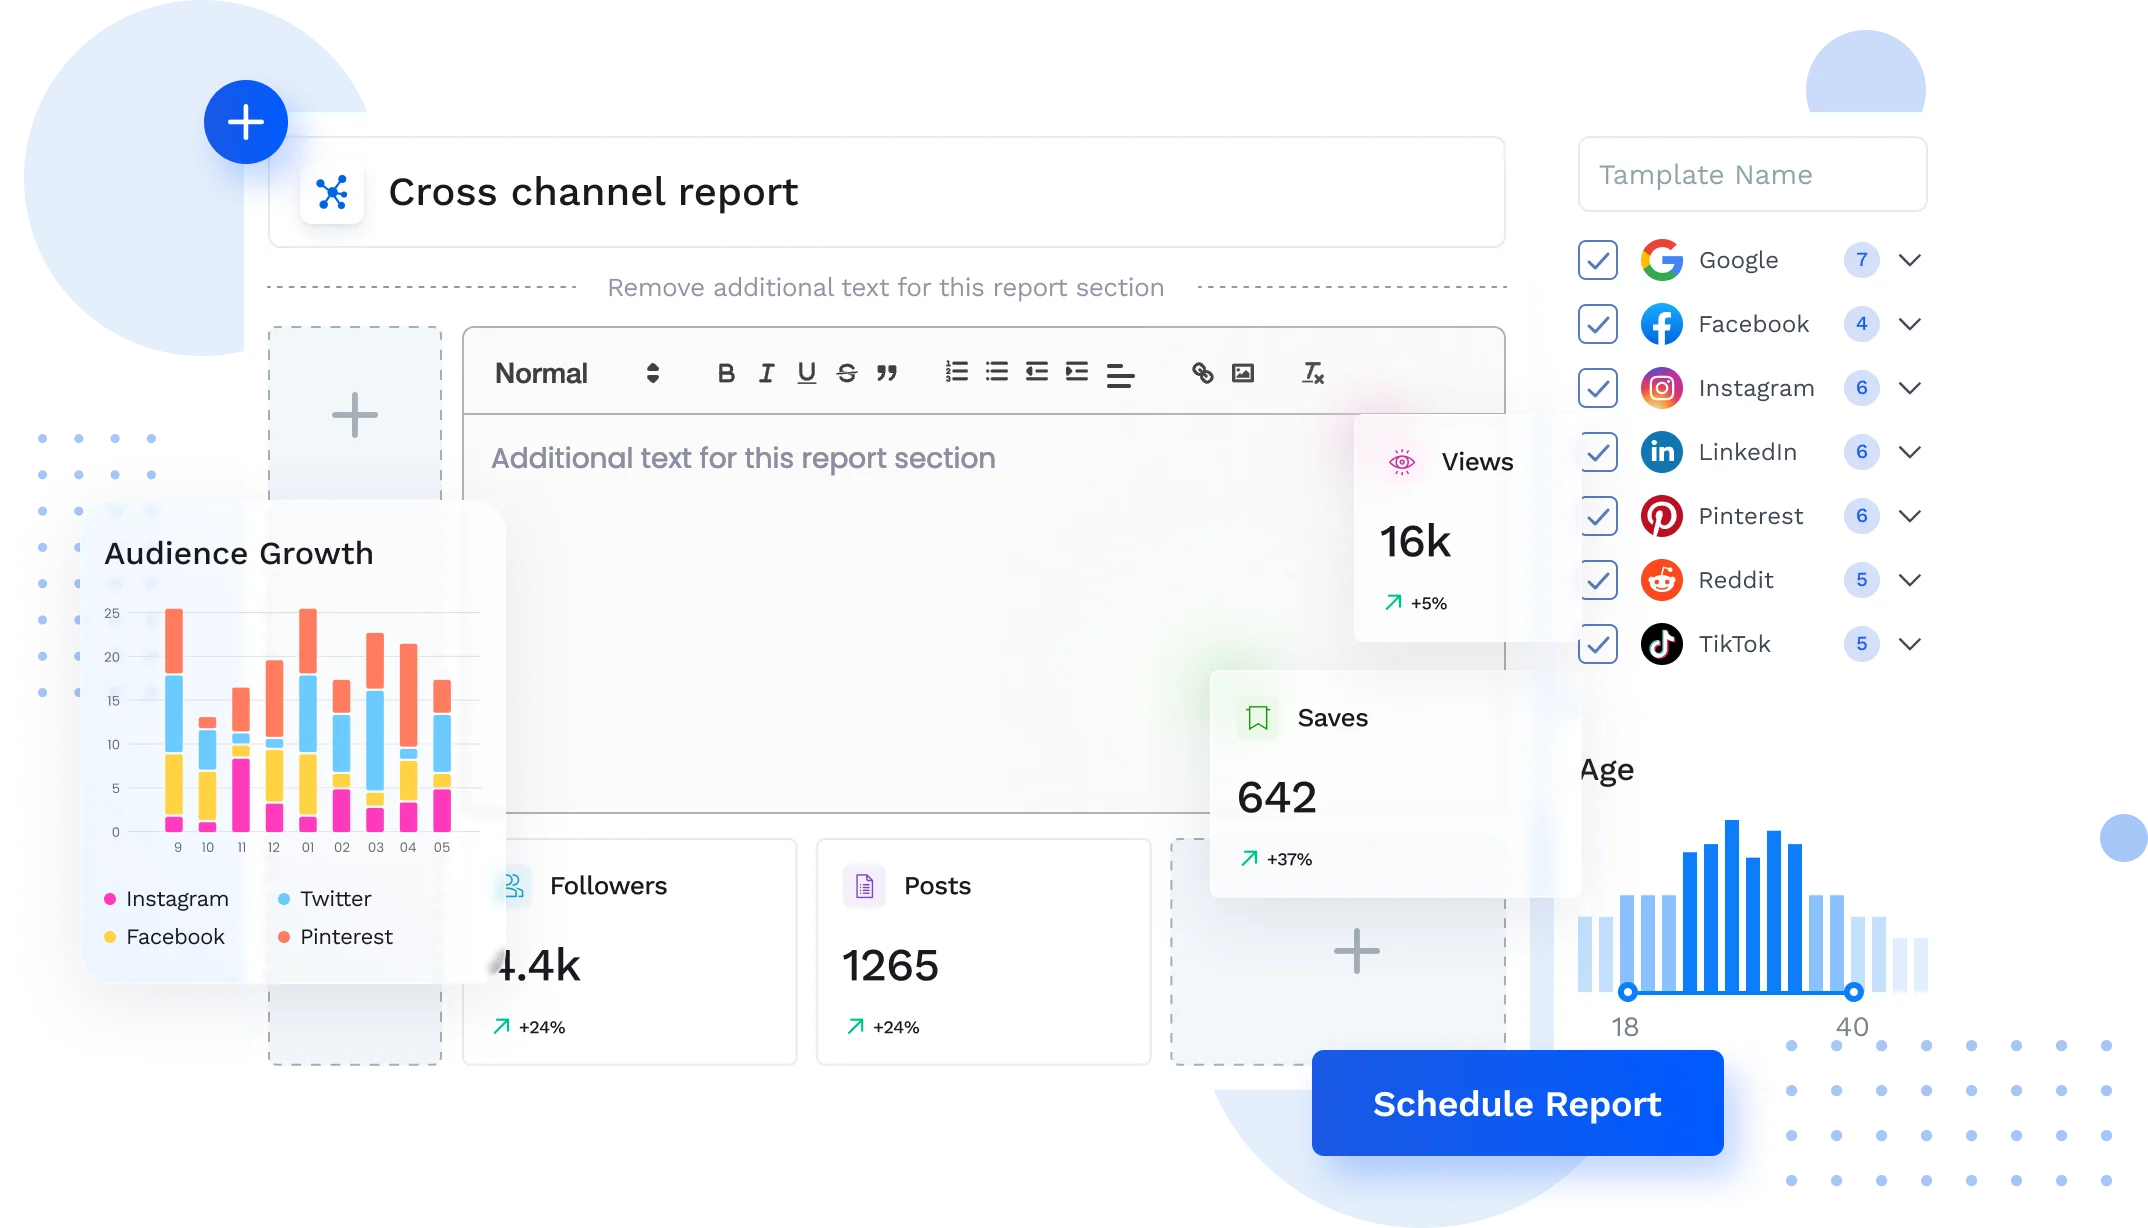 One dashboard for your social media Analytics and Reporting